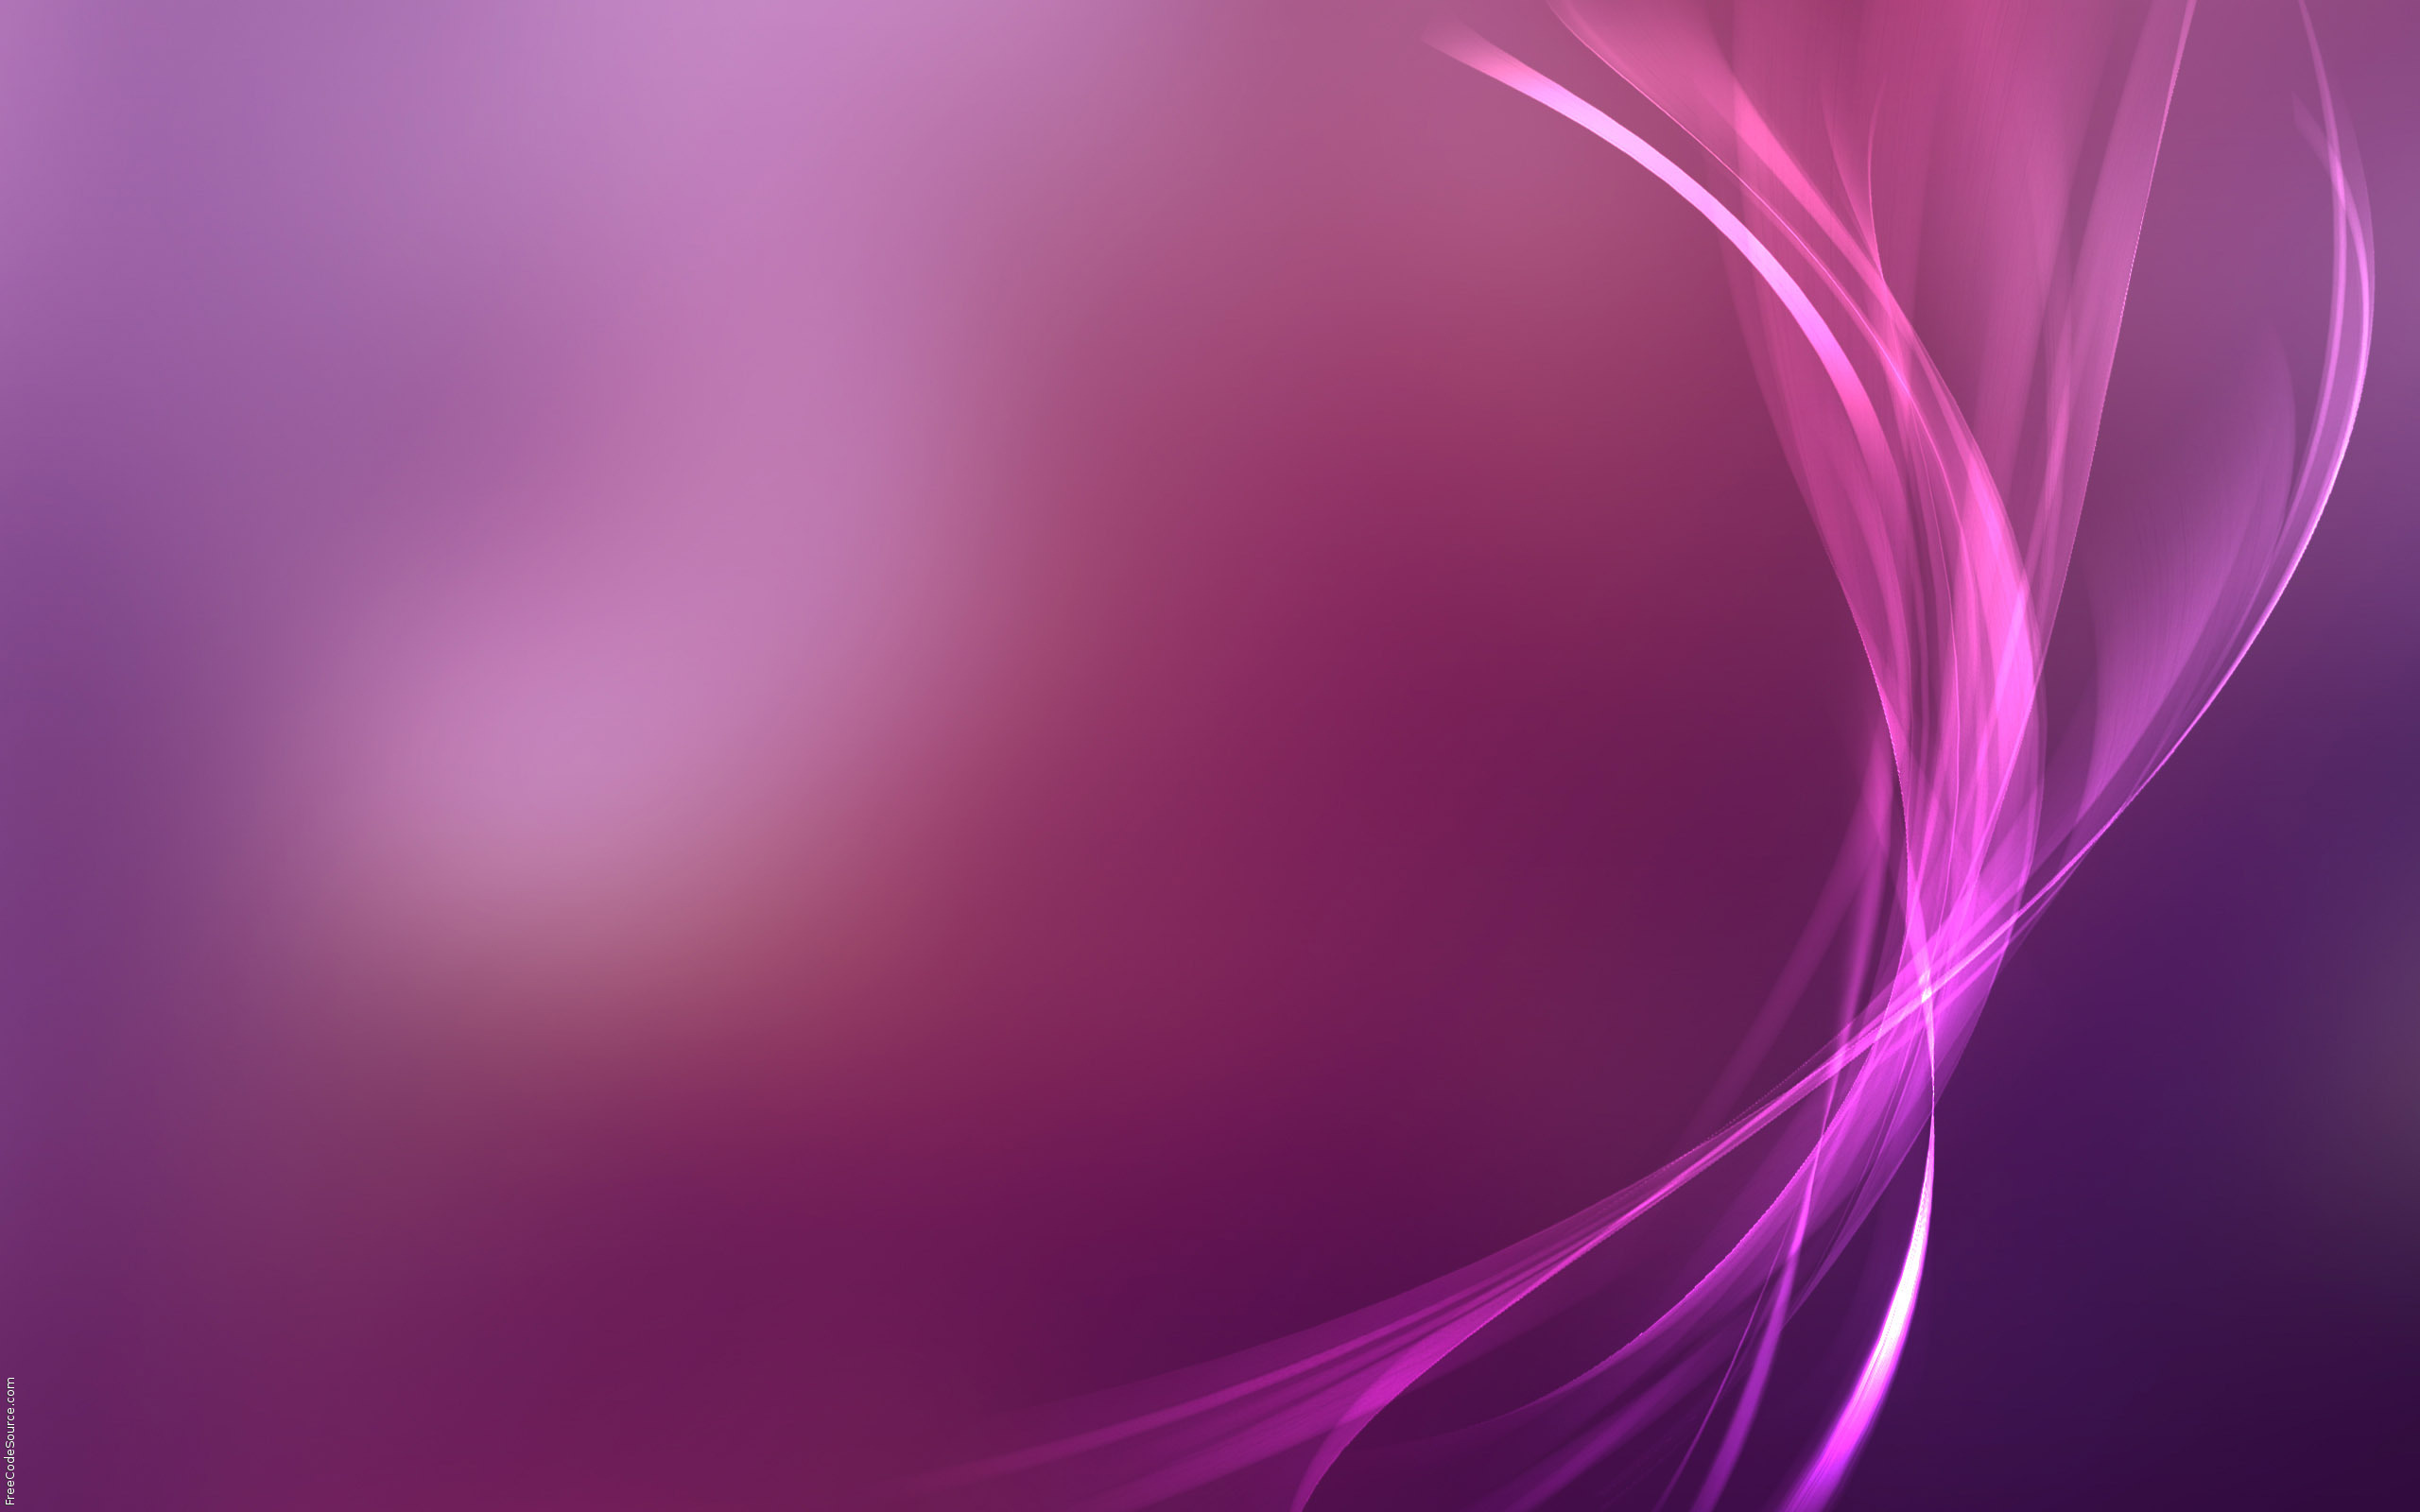 Gallery For Gt Purple Background Design